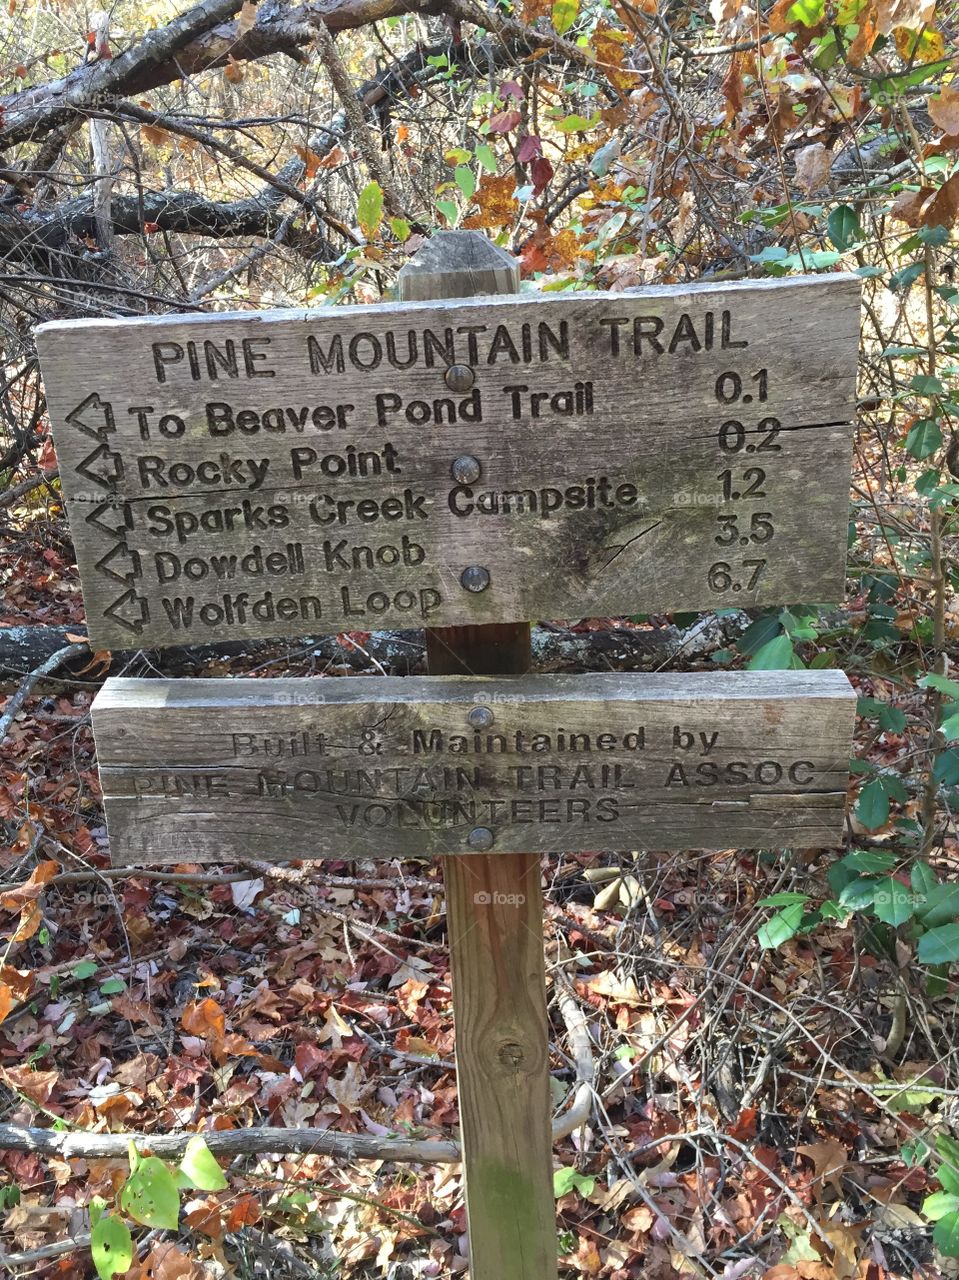 Old wooden trail sign with directions and what miles are to each destination, placed in the woods at a National Park in Georgia.